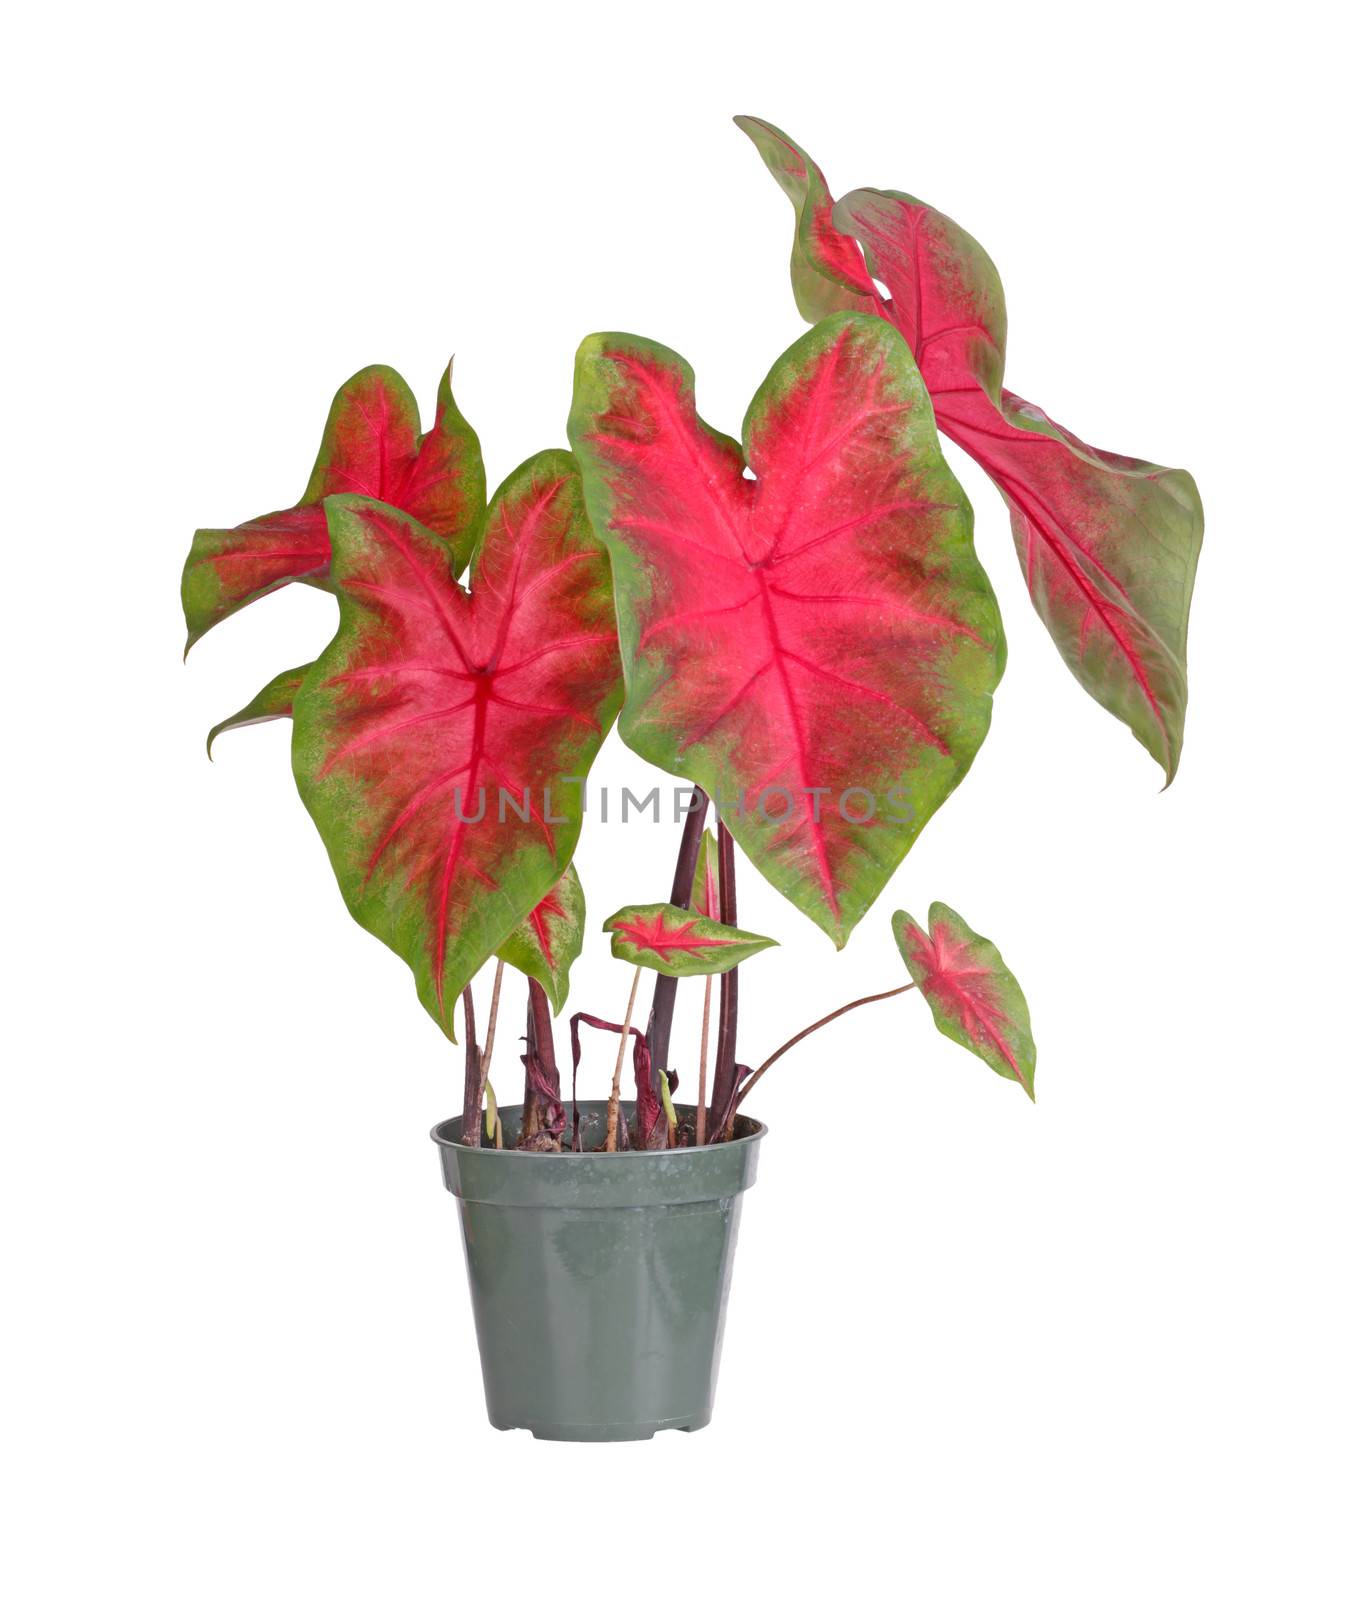 Plant of a red-and-green-leaved caladium cultivar (Caladium bicolor) in a small plastic pot ready to be transplanted into a garden